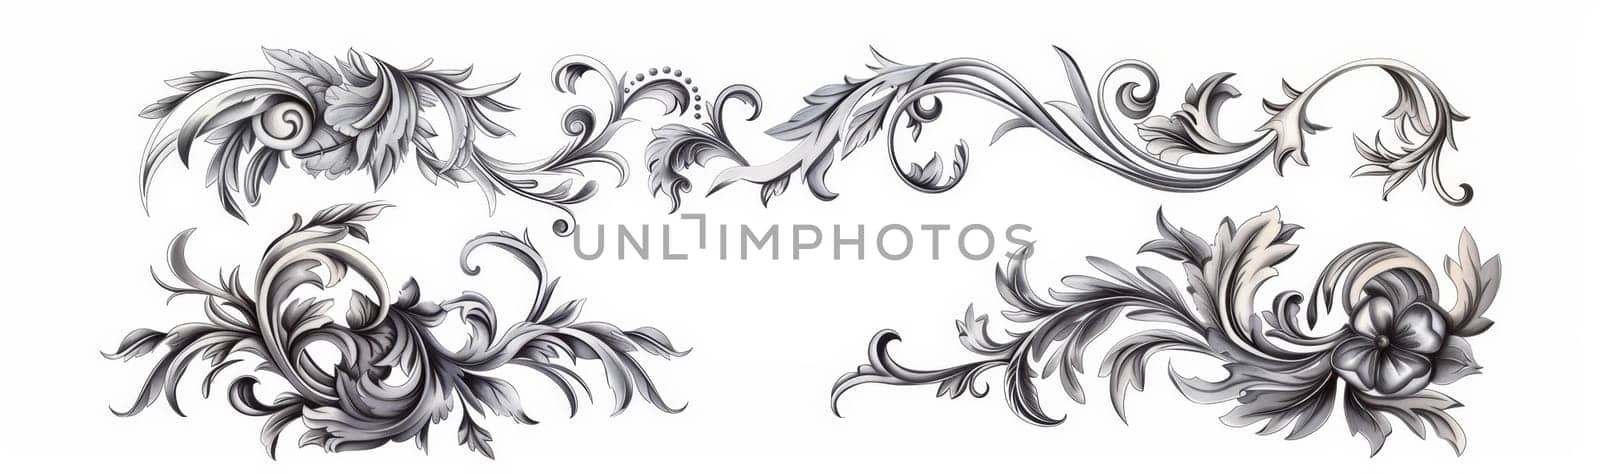 Elegant black and white illustration of symmetrical flourish designs with intricate patterns and swirls